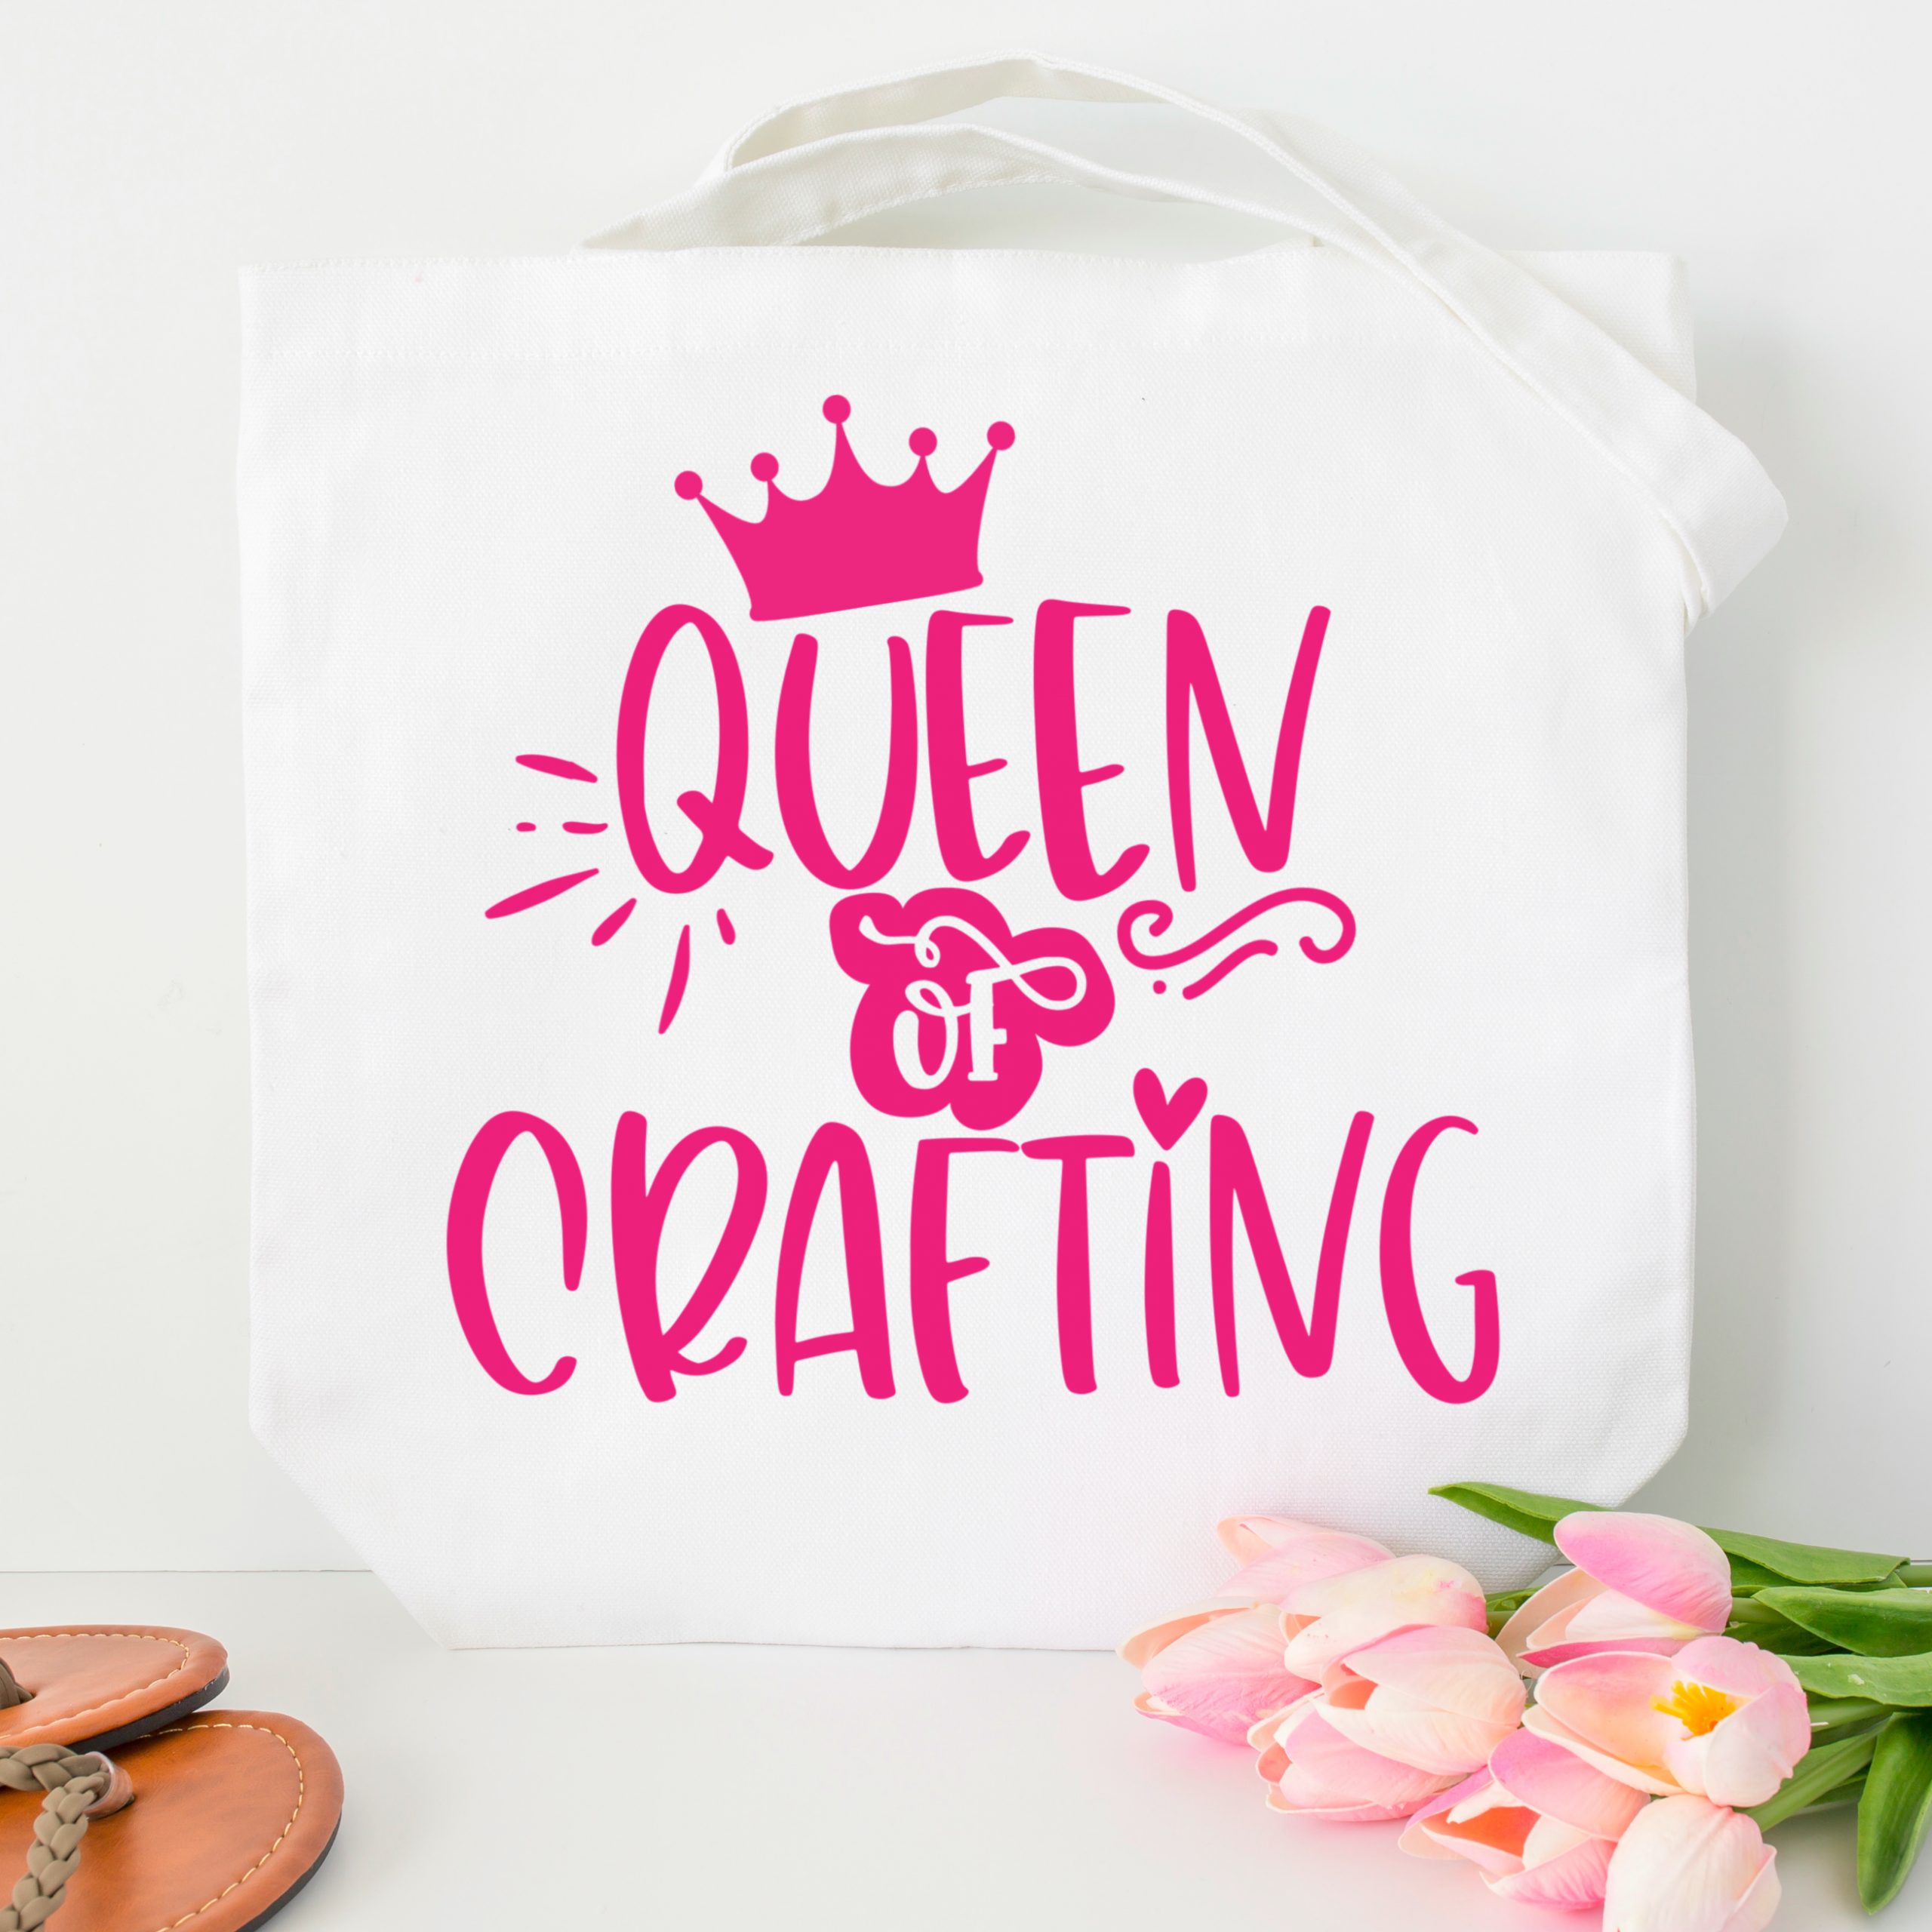 Queen of Crafting SVG on Tote Bag